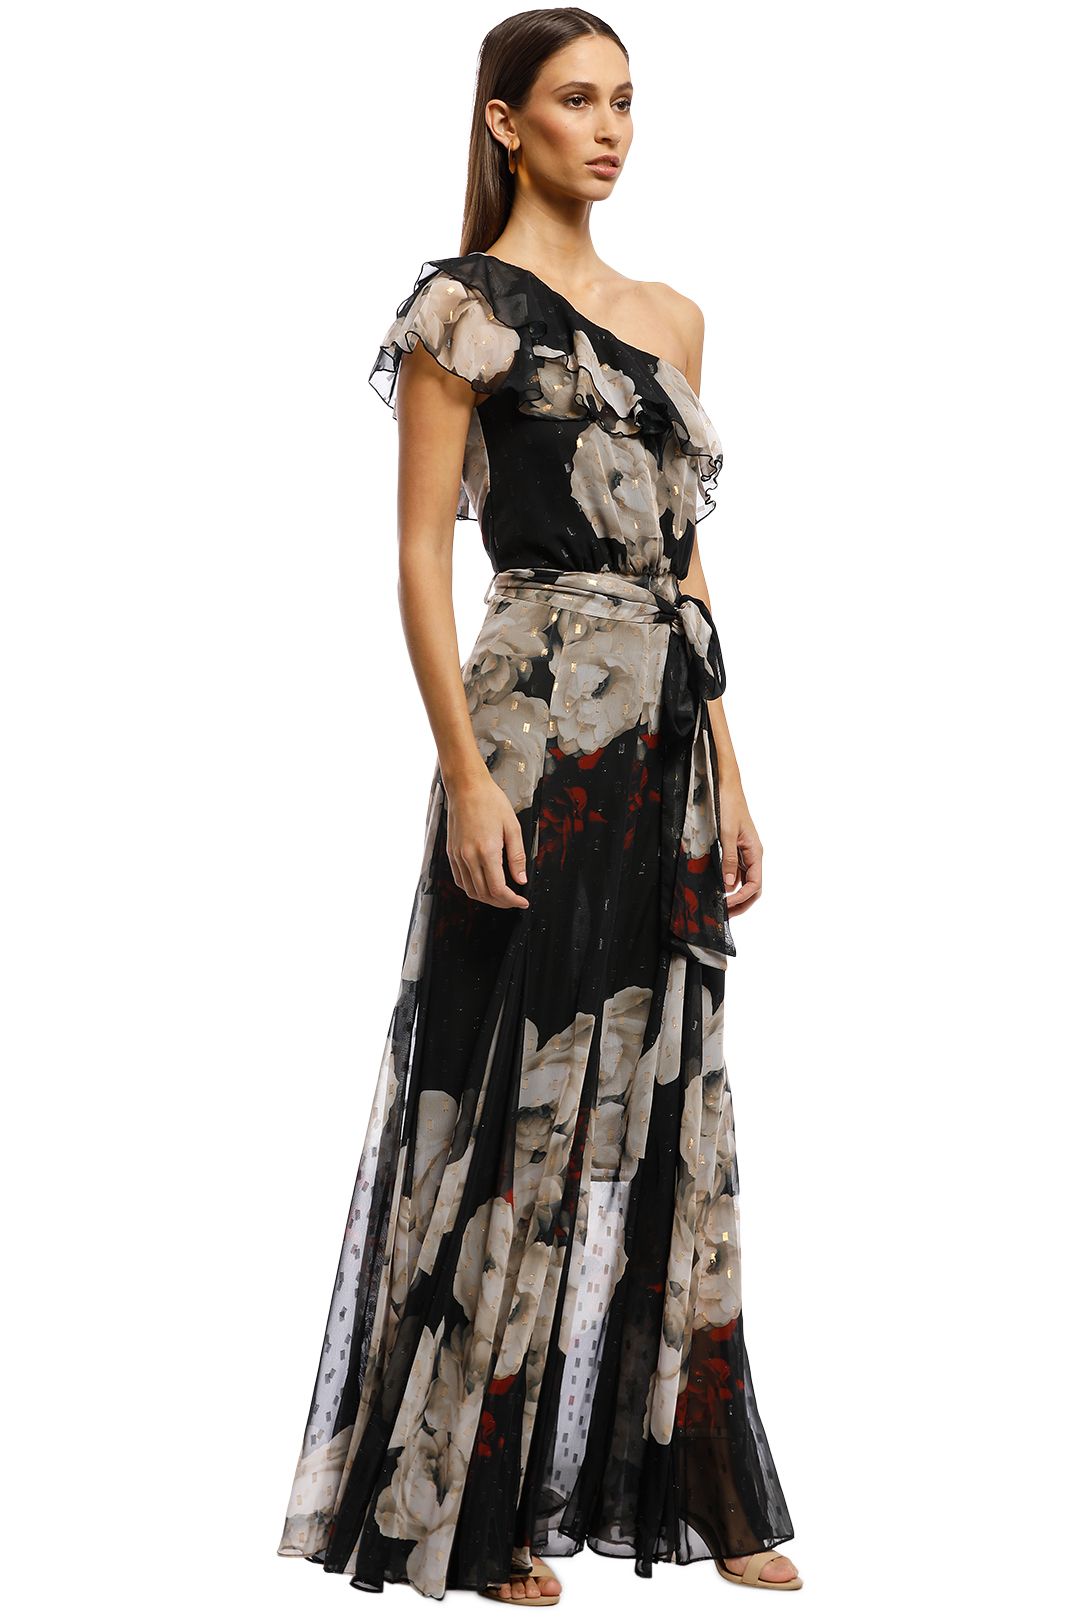 Montique - Inessa Gown - Black Floral - Side